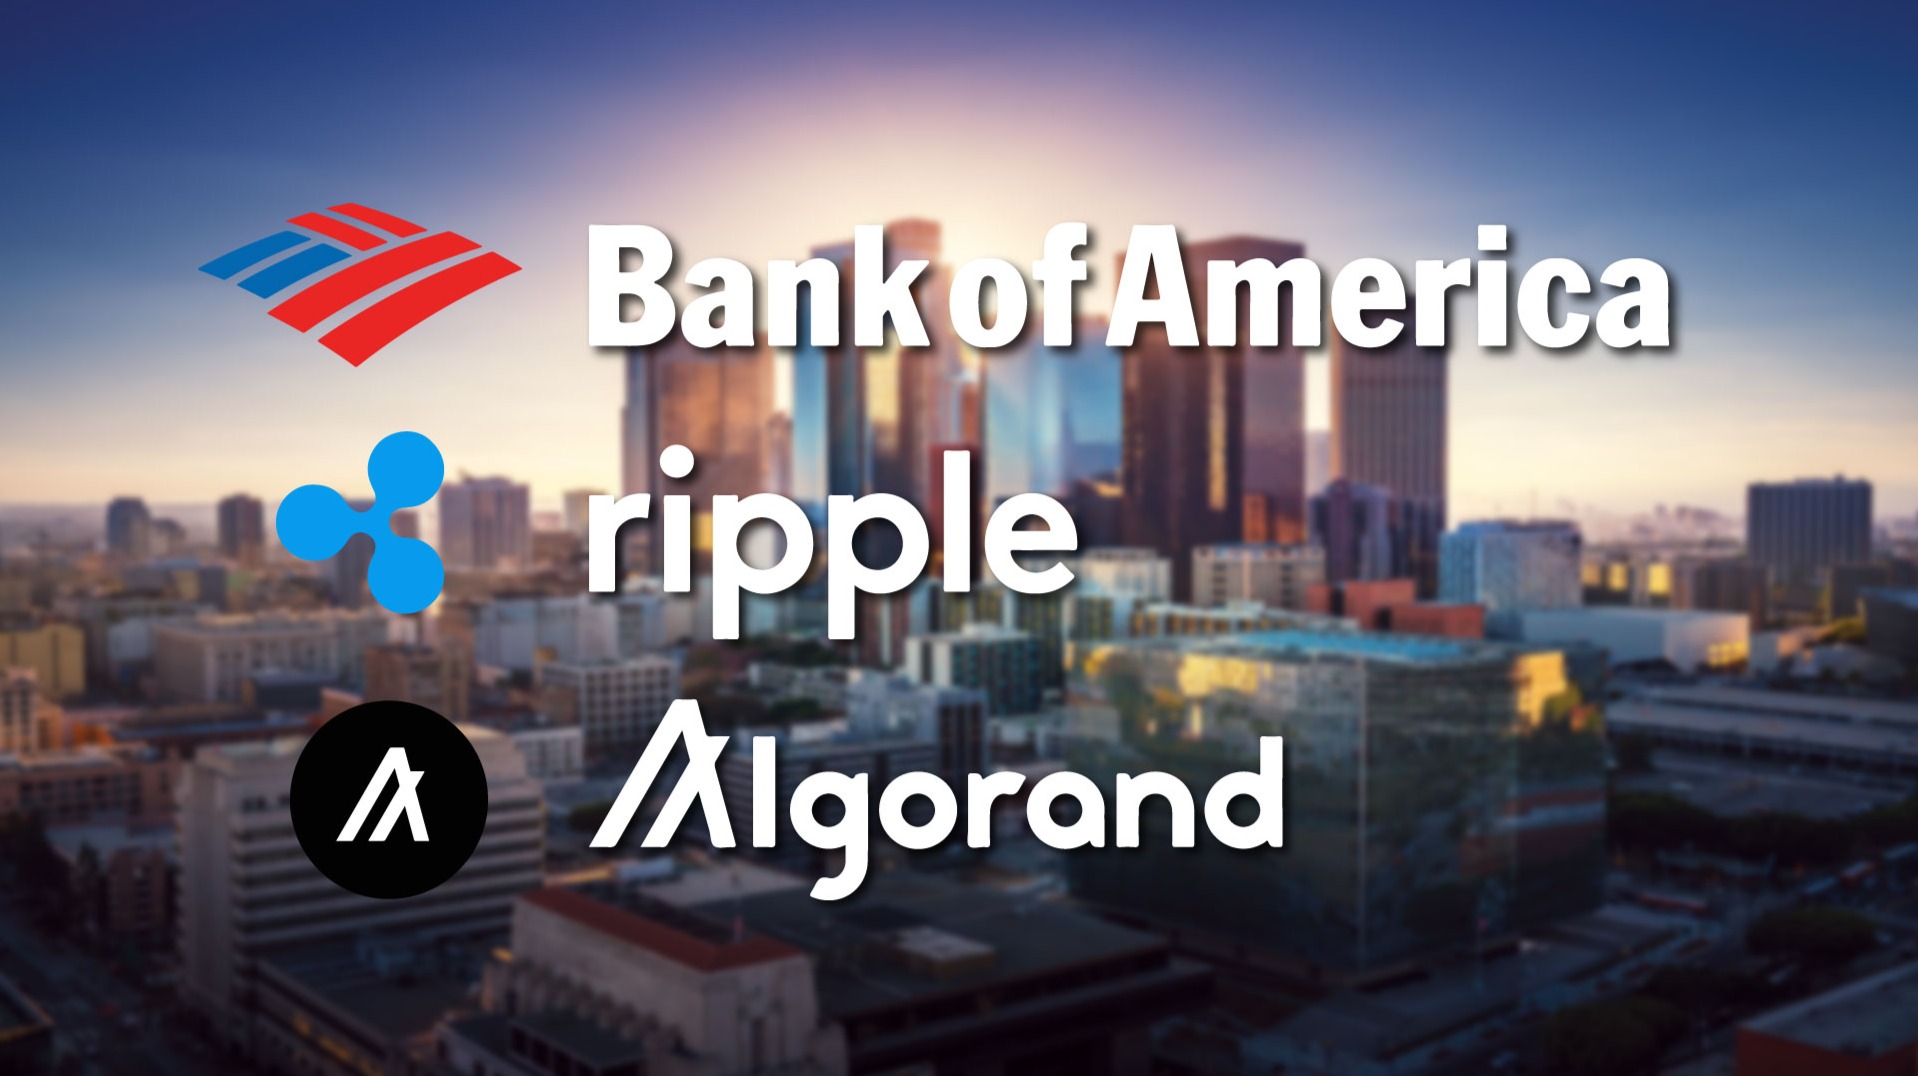 Bank of America Says Ripple Making Waves in Cross-Border Payments With Blockchain - The Daily Hodl